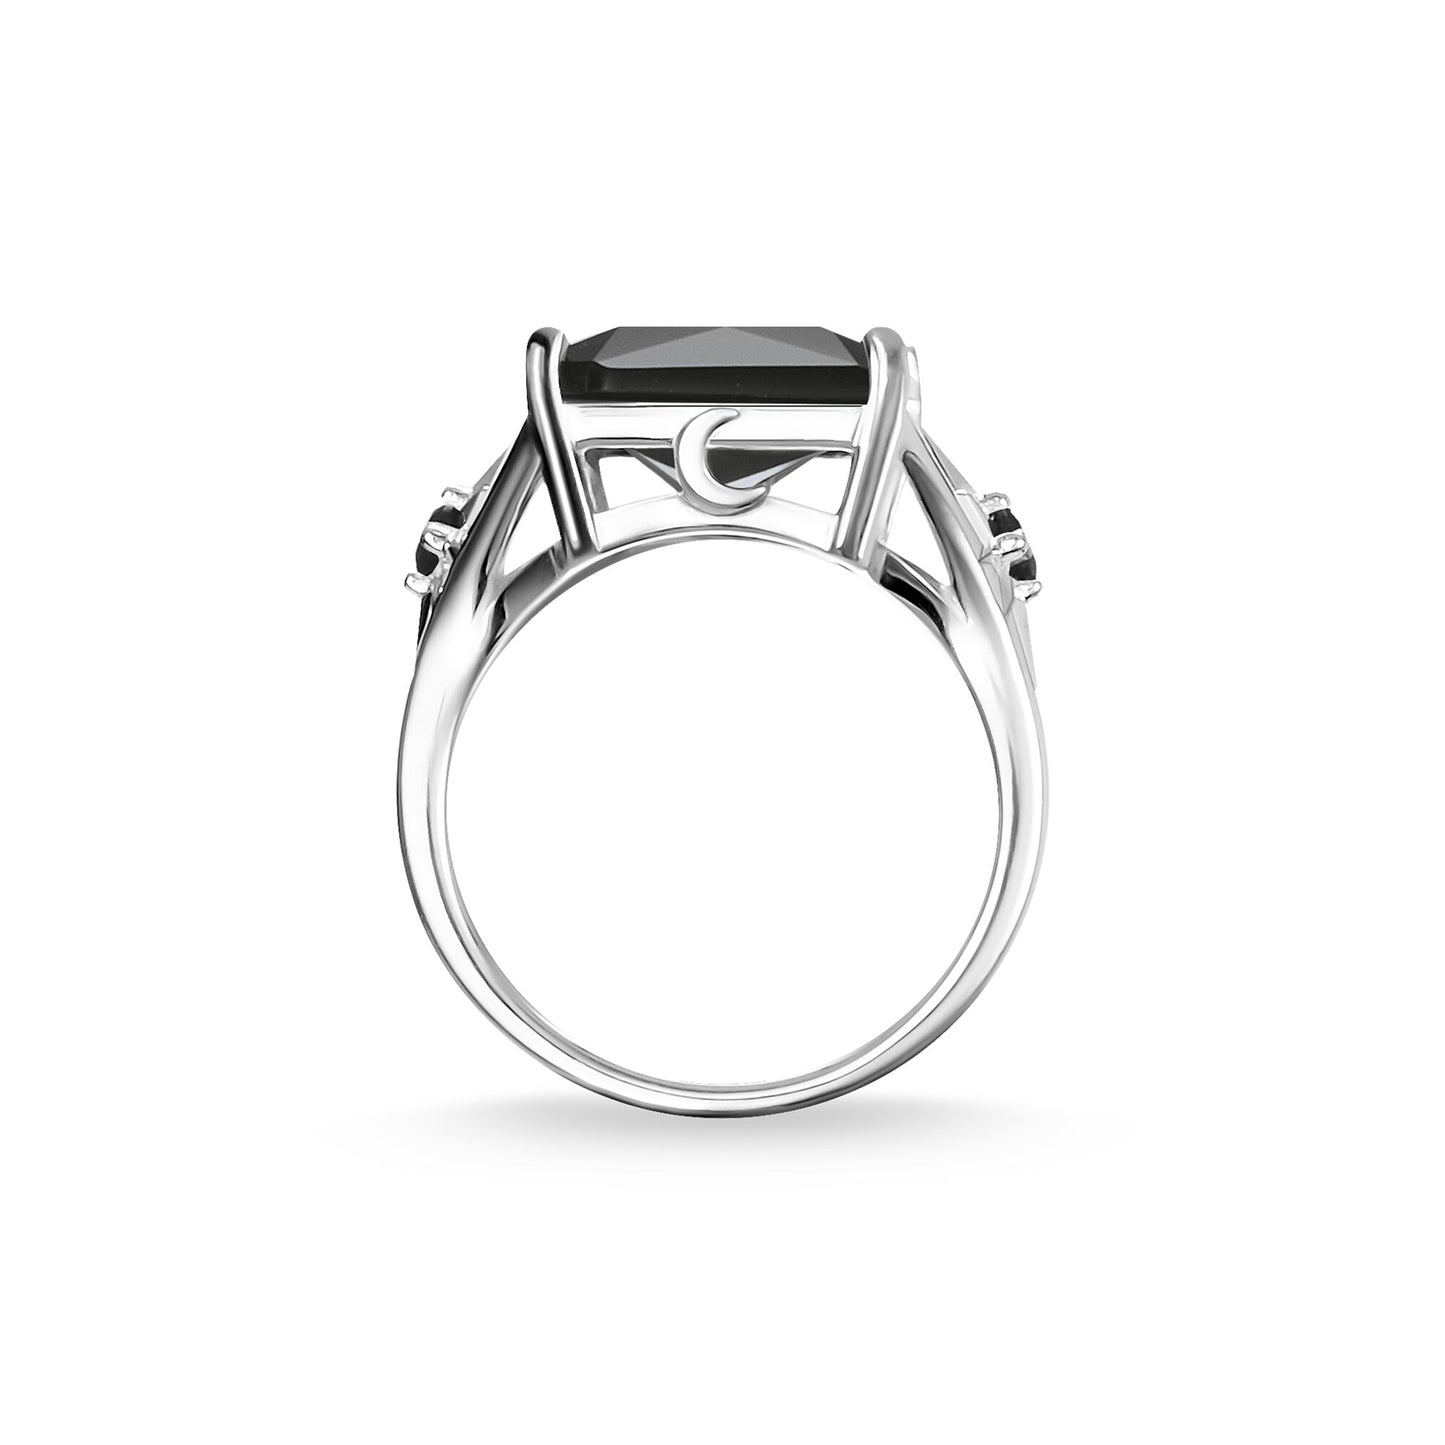 STERLING SILVER MAGIC STONES ONYX STATEMENT RING